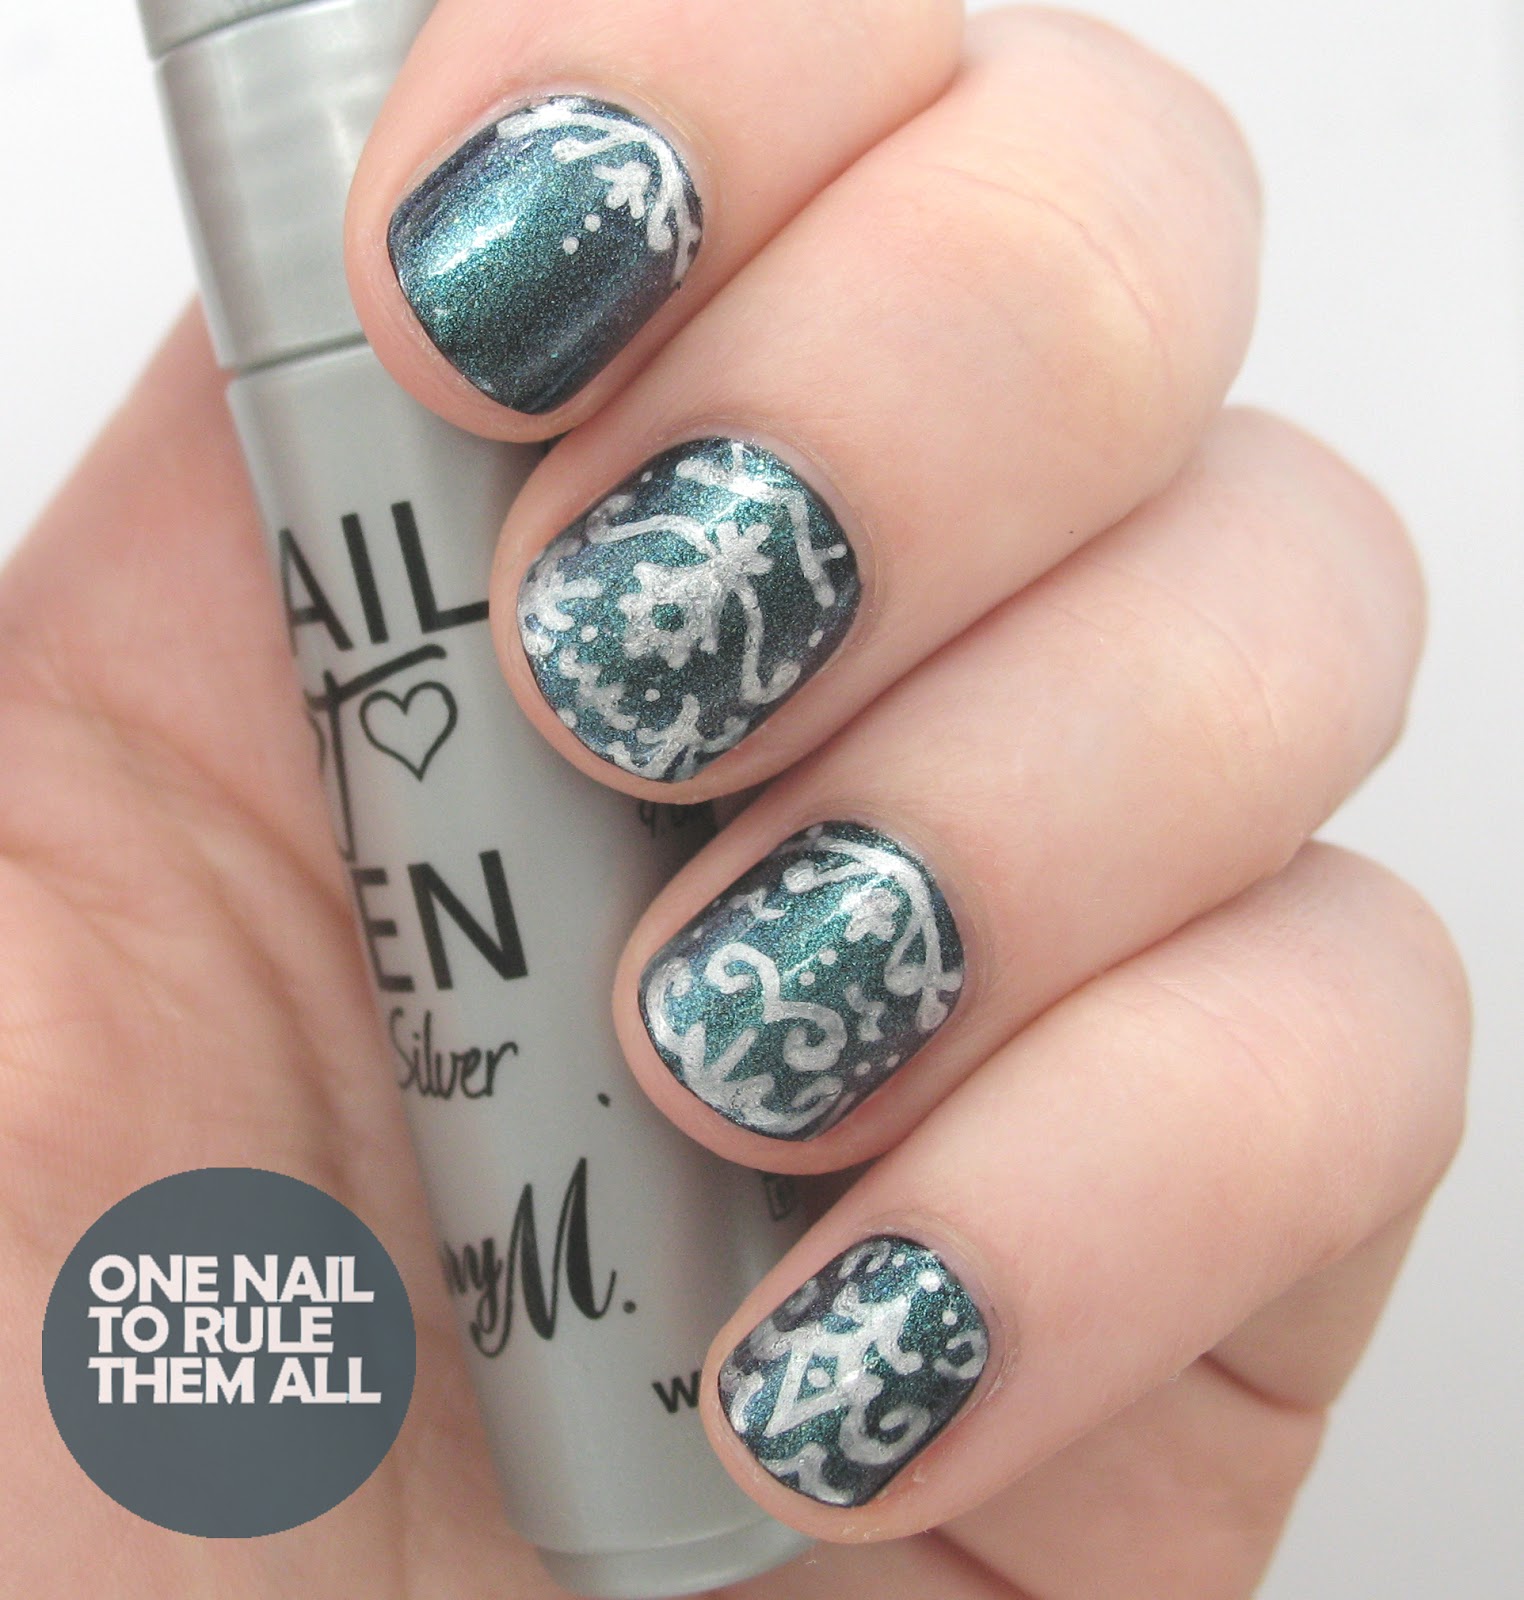 One Nail To Rule Them All: Barry M Nail Art Pens Review